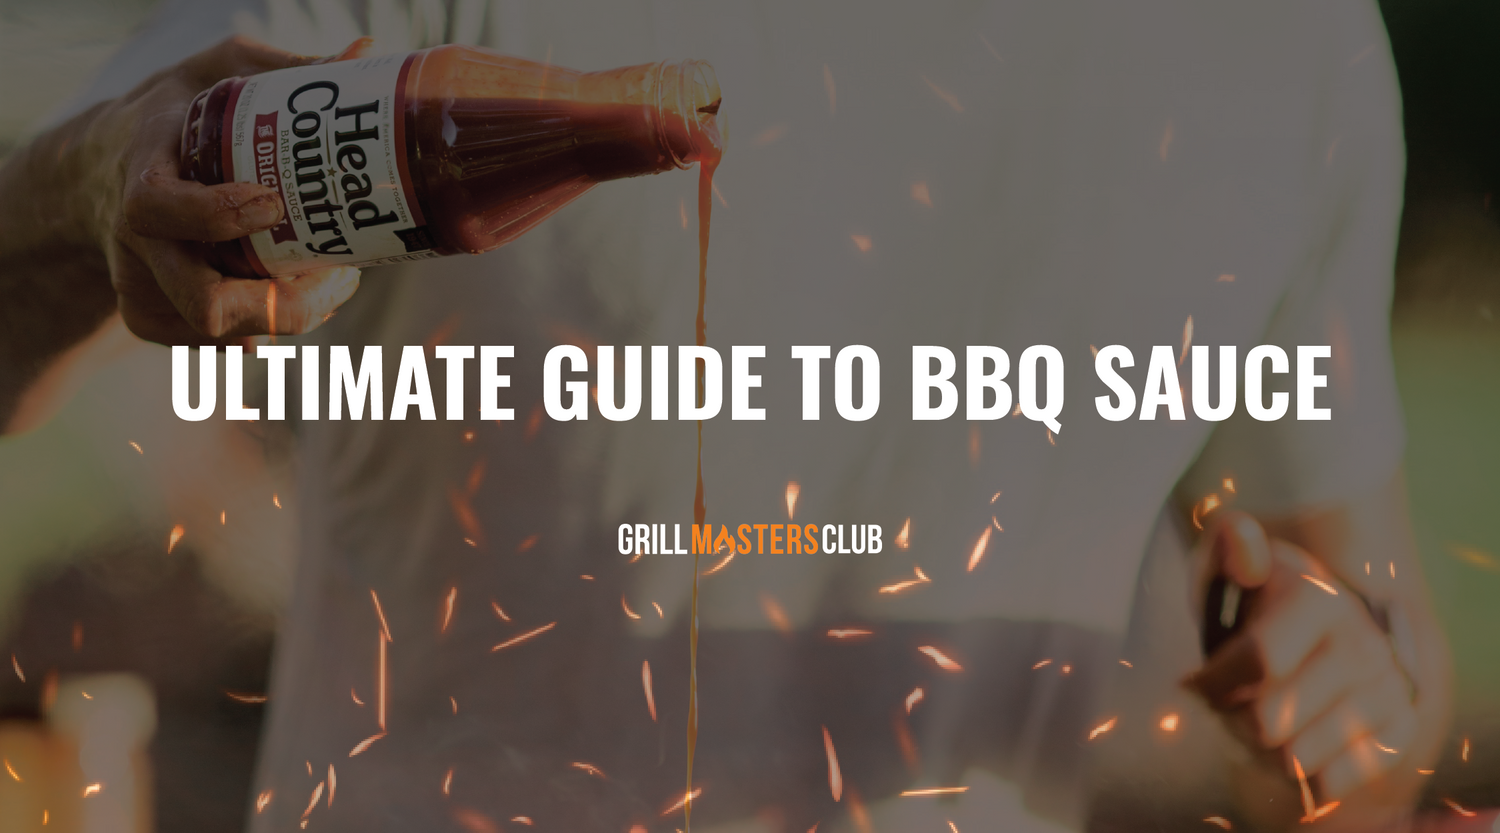 ultimate guide to bbq sauce, barbecue sauce, bbq sauce, grill masters club, gmc, bbq subscription box